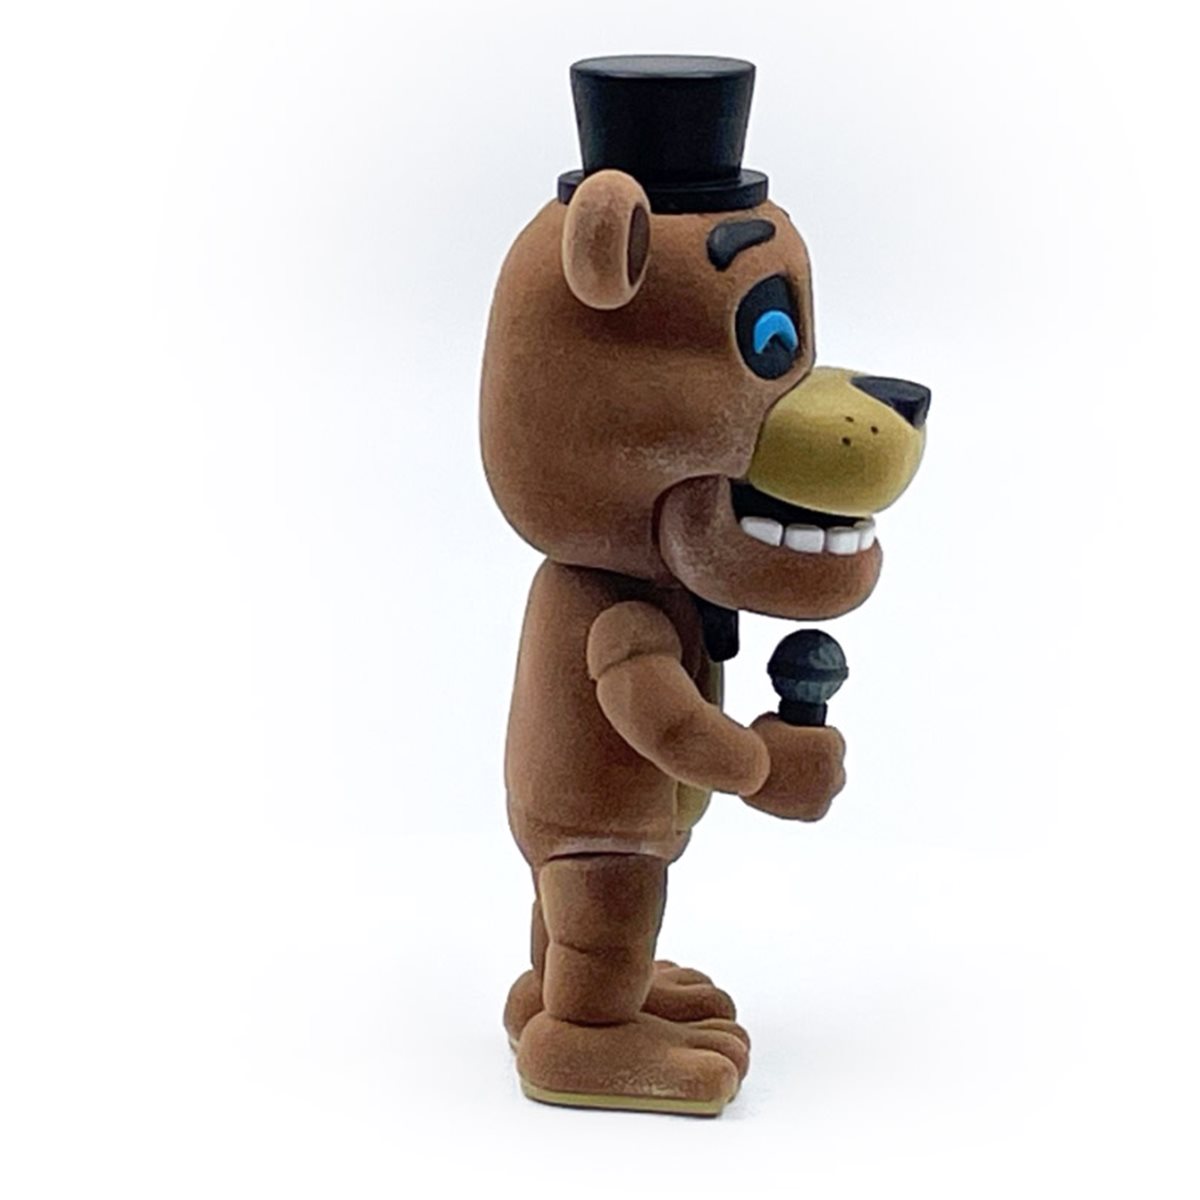 Five Nights At Freddy's Vinyl Figure Ruined Eclipse 11 Cm Youtooz